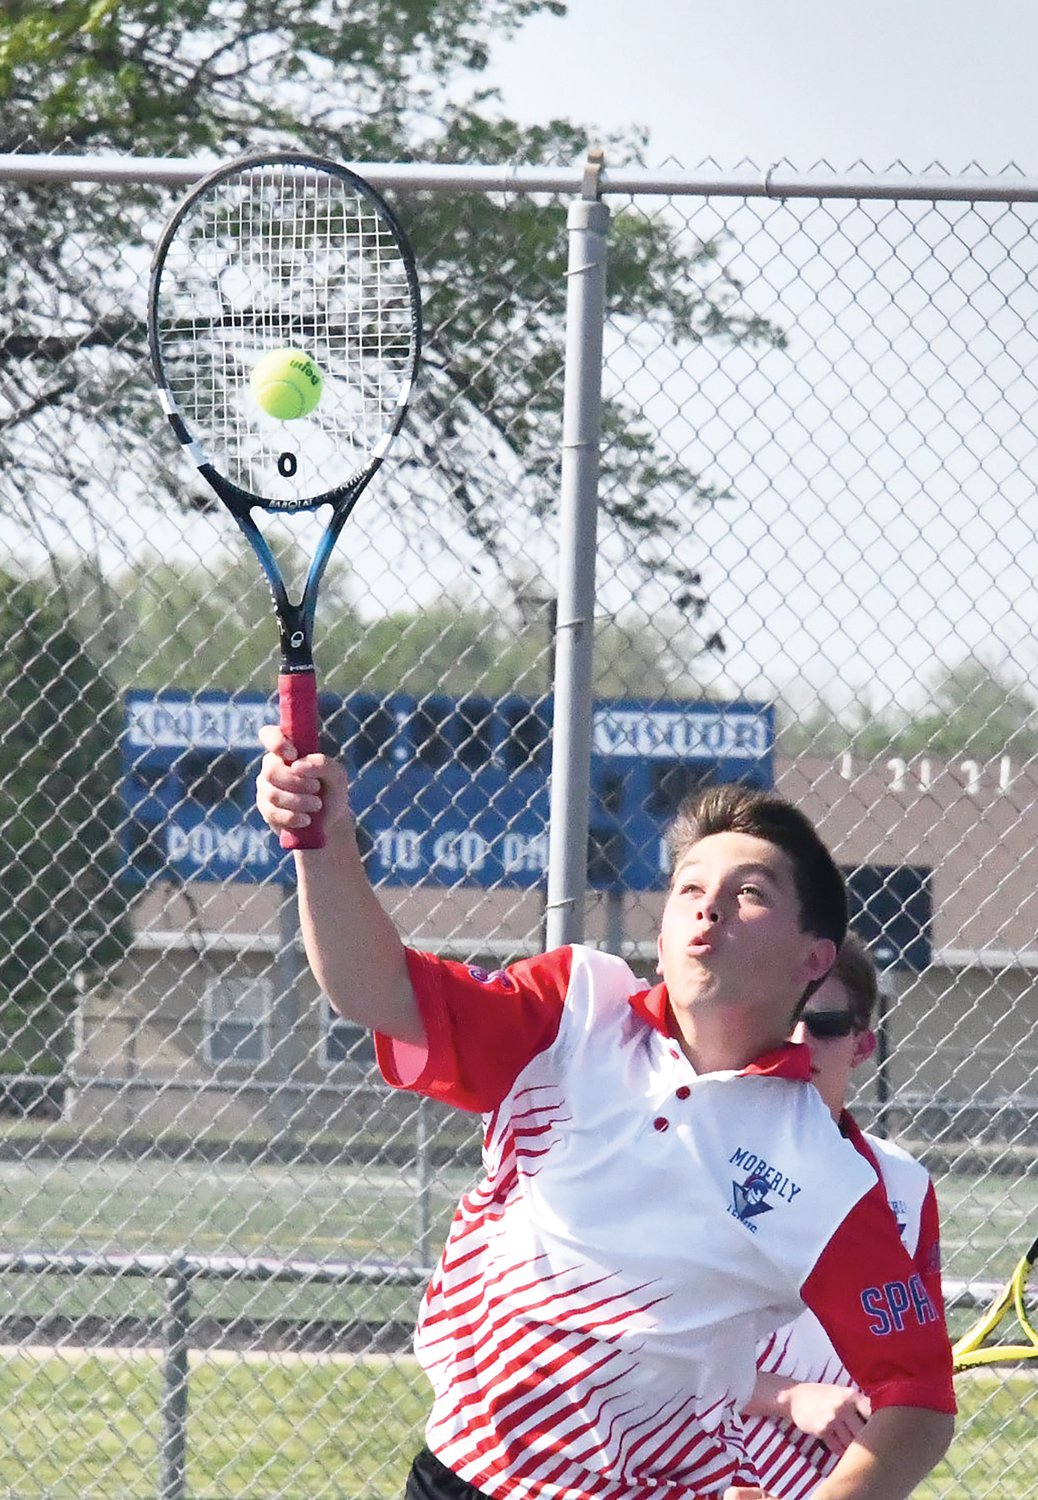 Moberly High School’s Ryan O’Loughlin delivers a smash during a doubles match versus Father Tolton Regional Catholic at the Class 1 District 7 championship Wednesday.